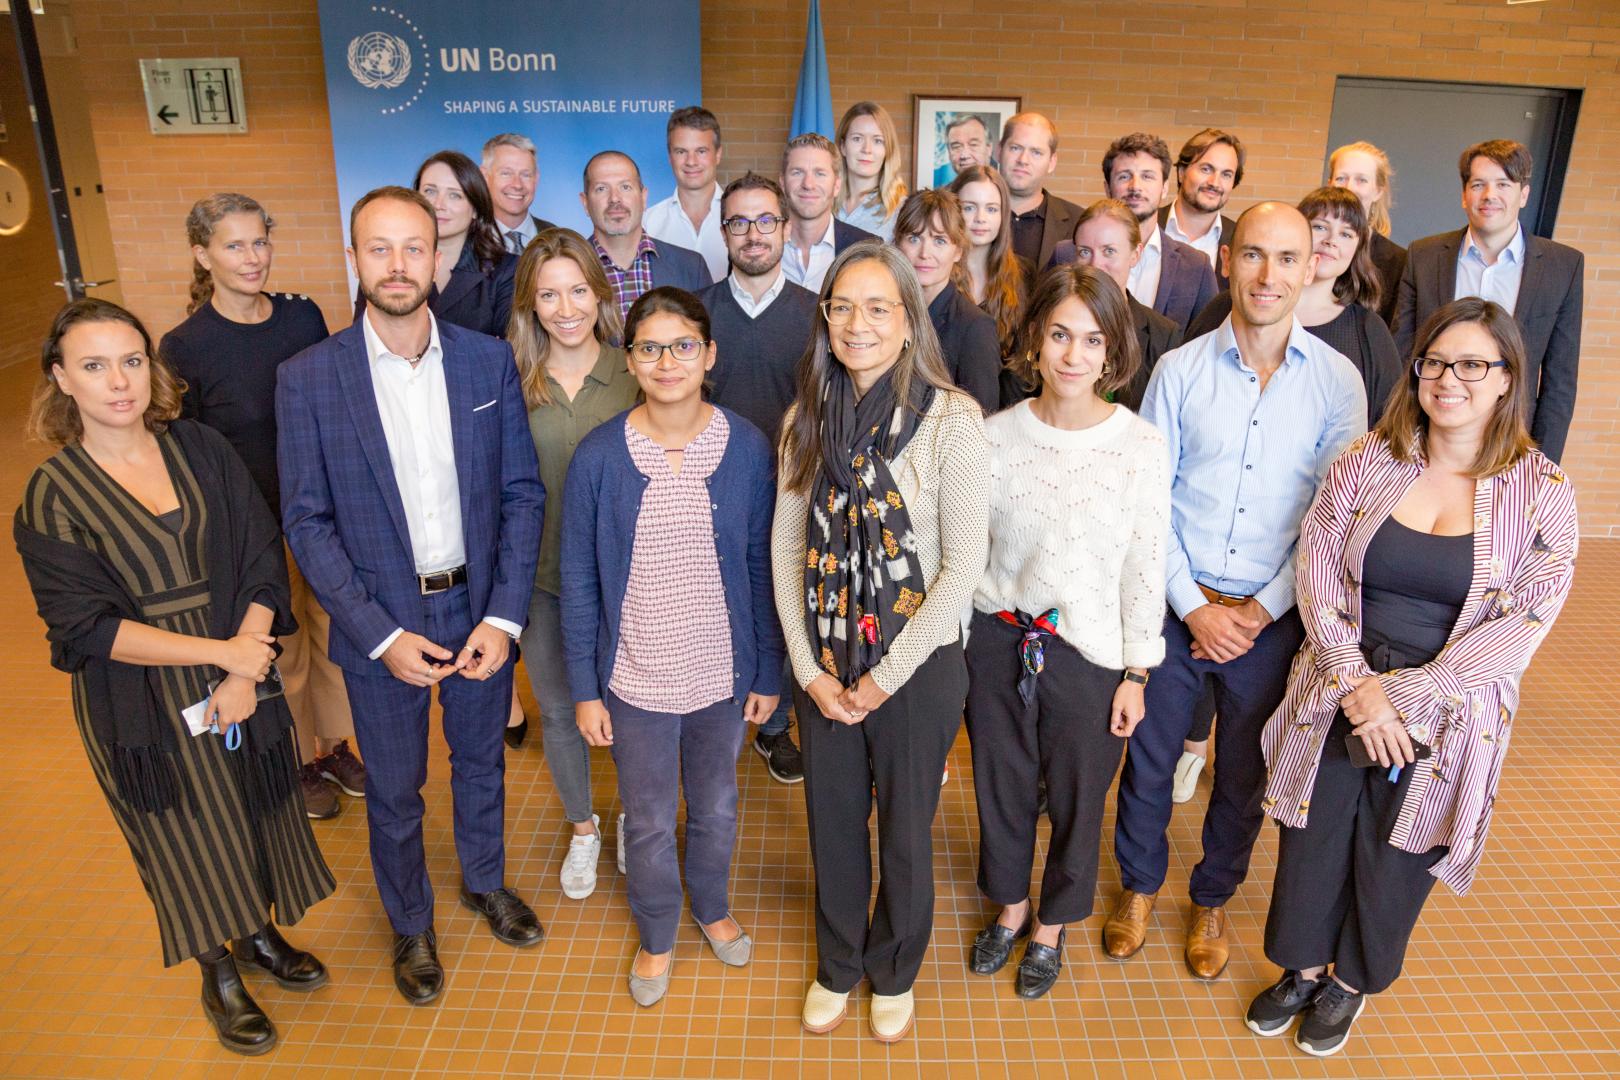 Family photo of Fashion Representatives present at the second meeting in Bonn